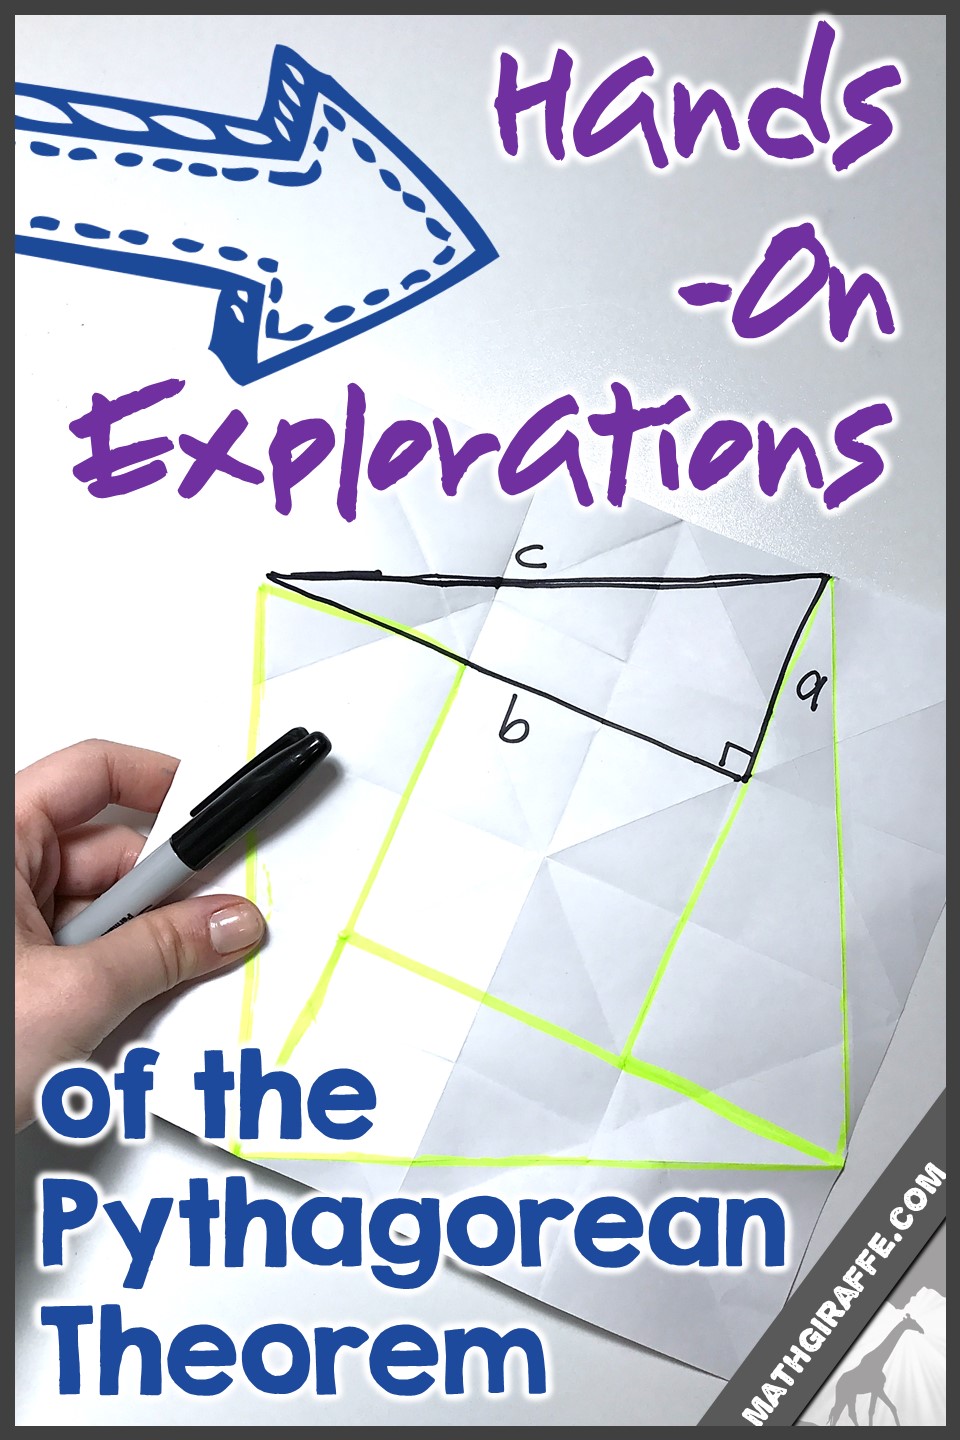 Hands-On Explorations, Activities, & Ideas for Pythagorean Theorem